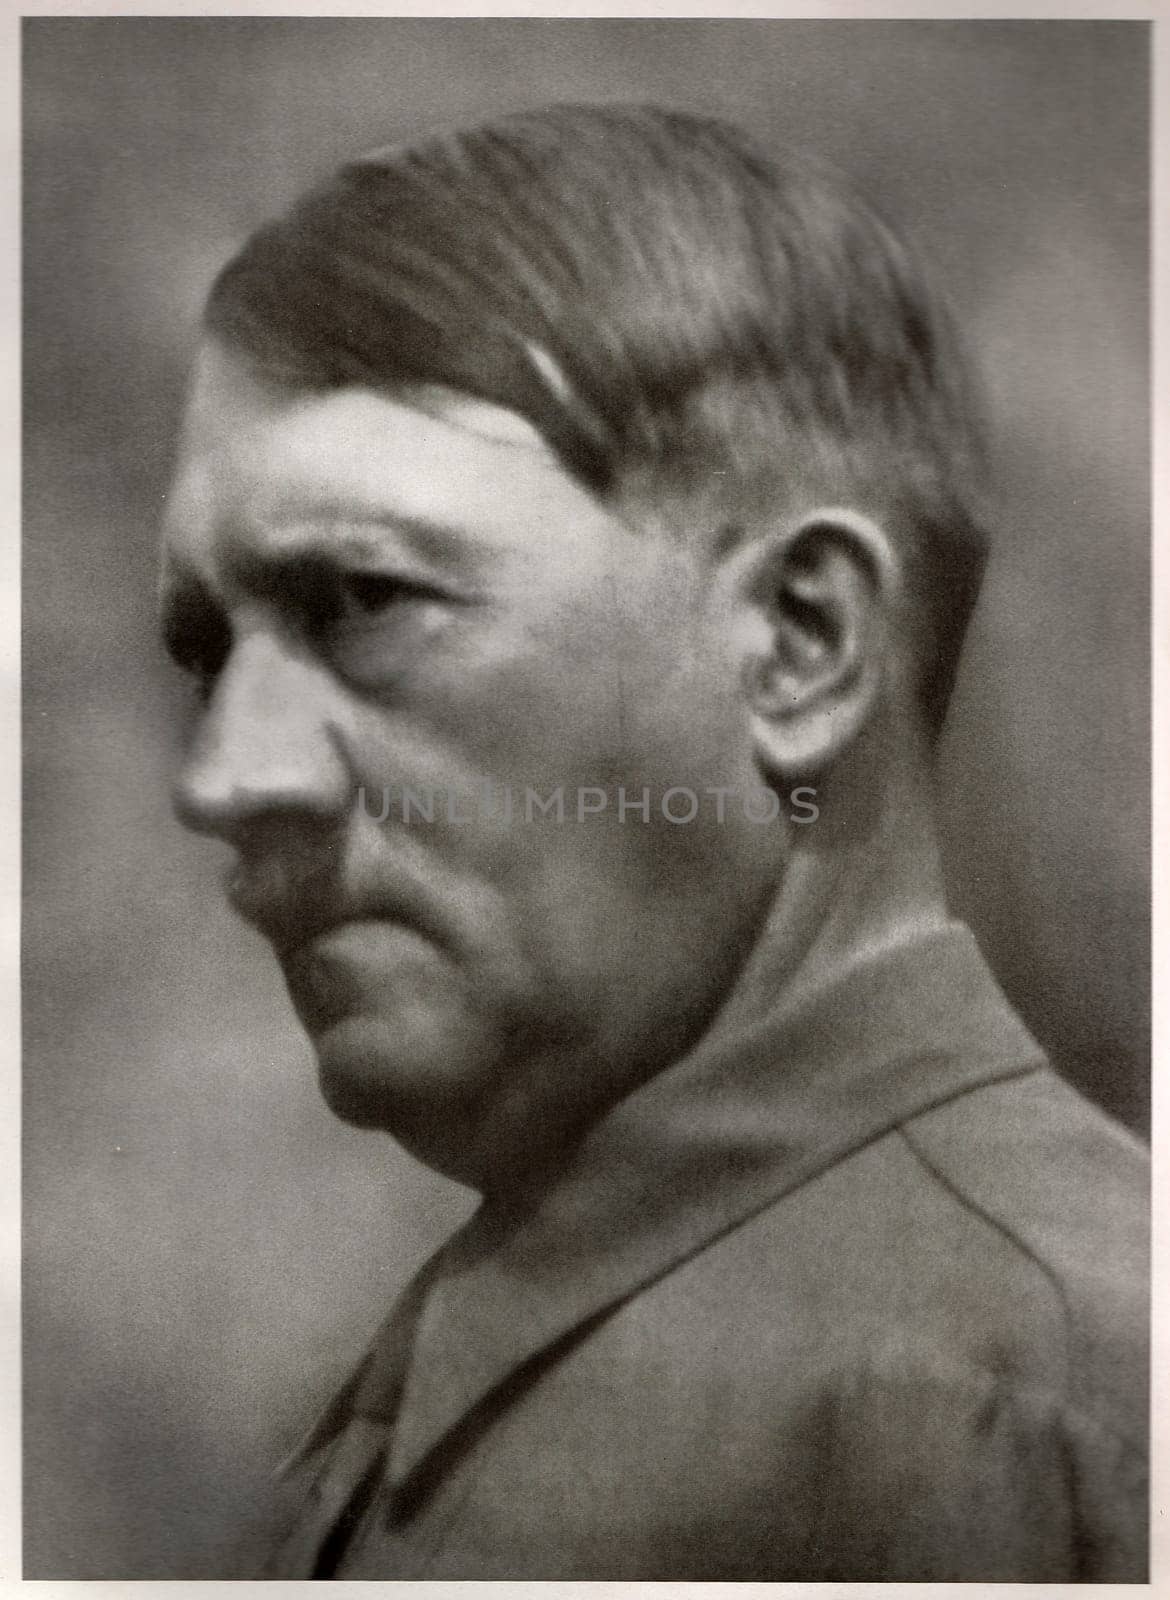 GERMANY - 1934: Studio portrait of Adolf Hitler, leader of nazi Germany. Reproduction of antique photo.